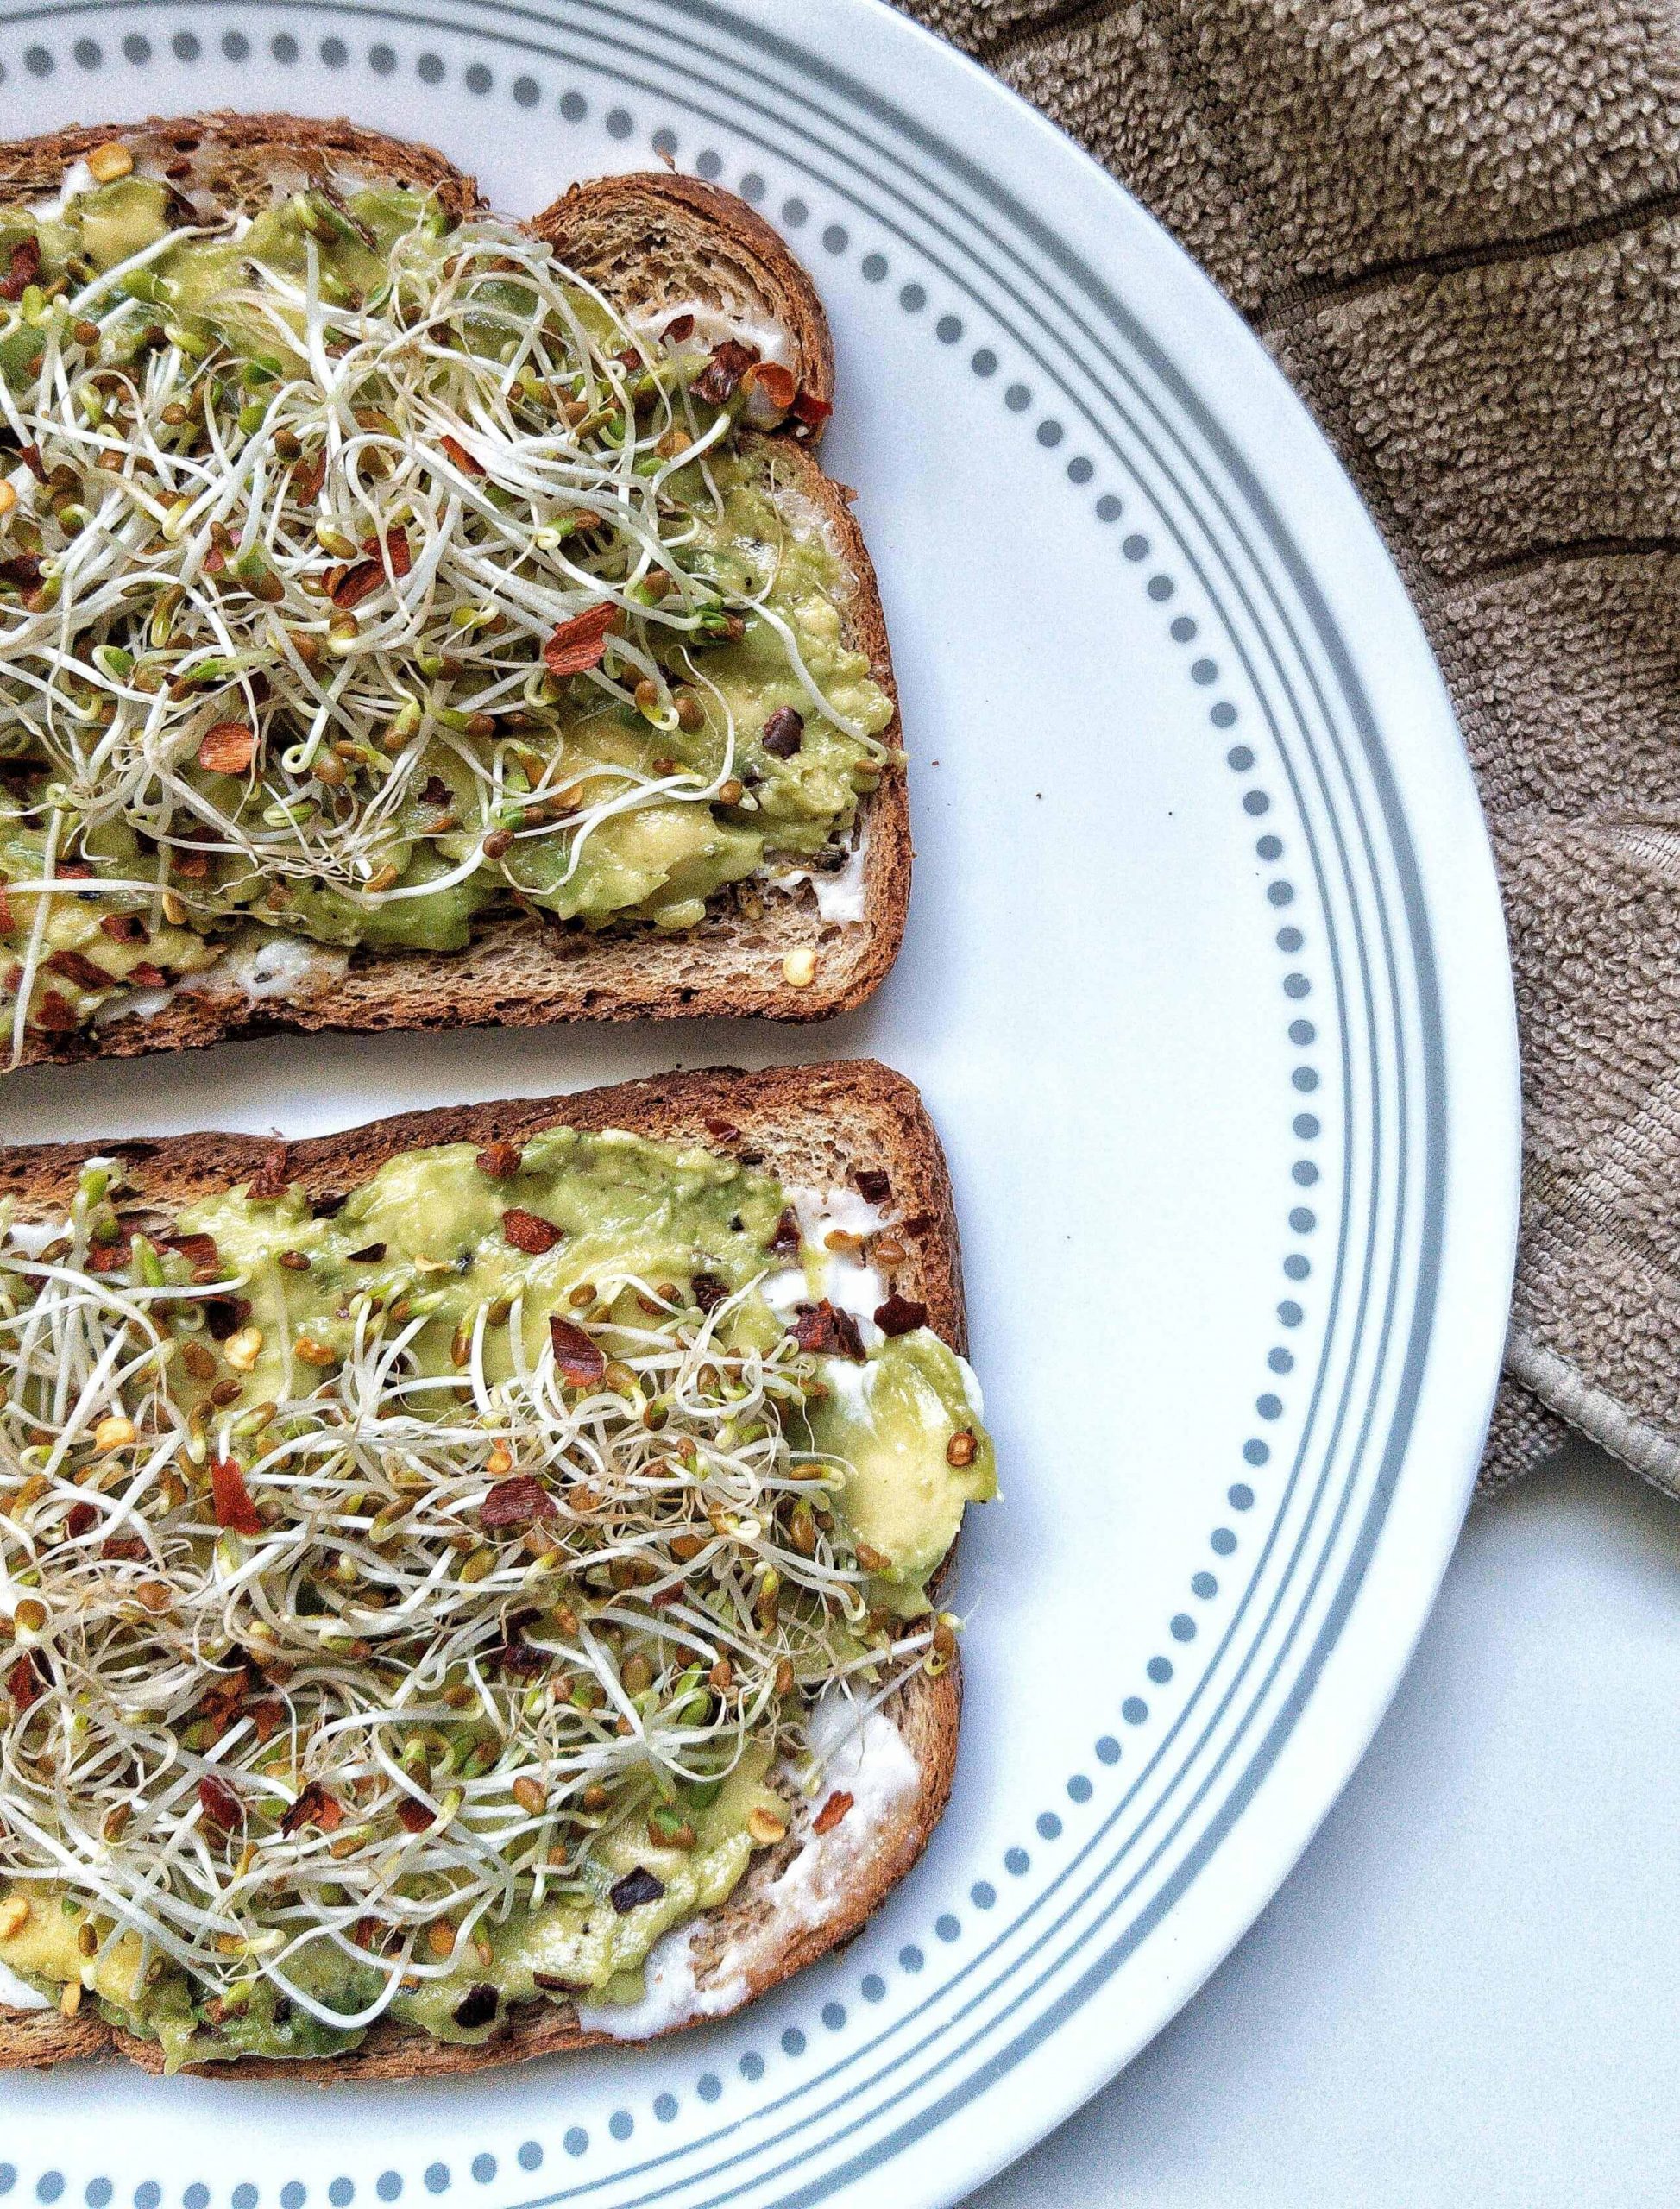 Avocado toast on whole wheat bread topped with sprouts and a pinch of red chili flakes